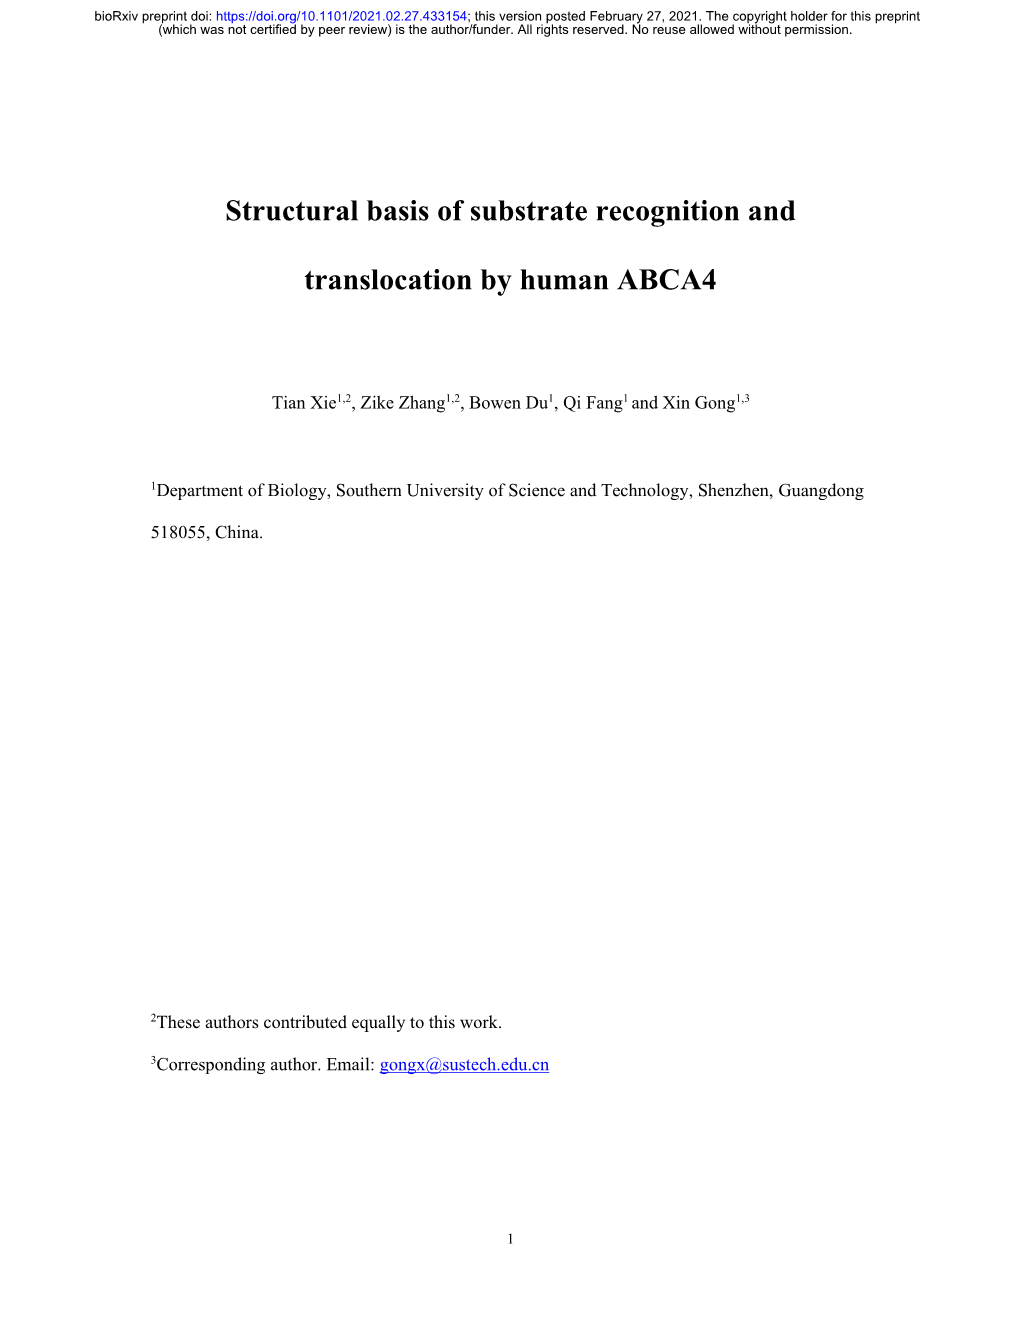 Structural Basis of Substrate Recognition And